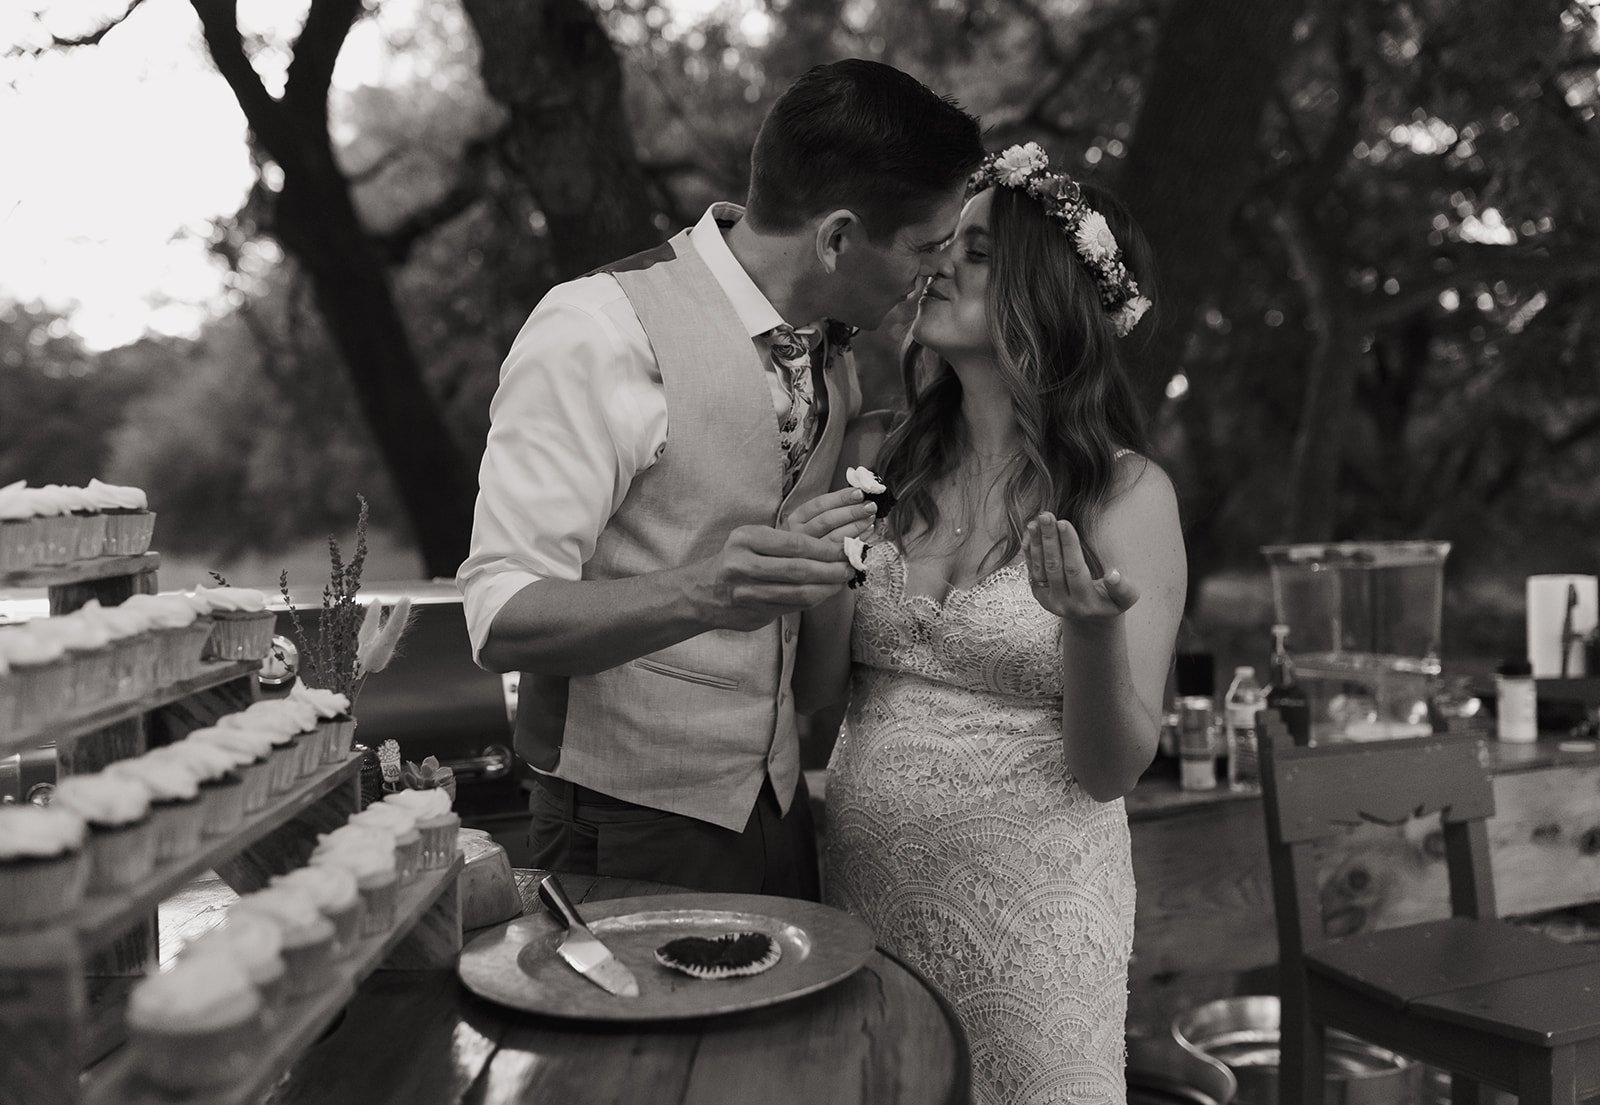 Black and white photo of couple kissing over cupcakes